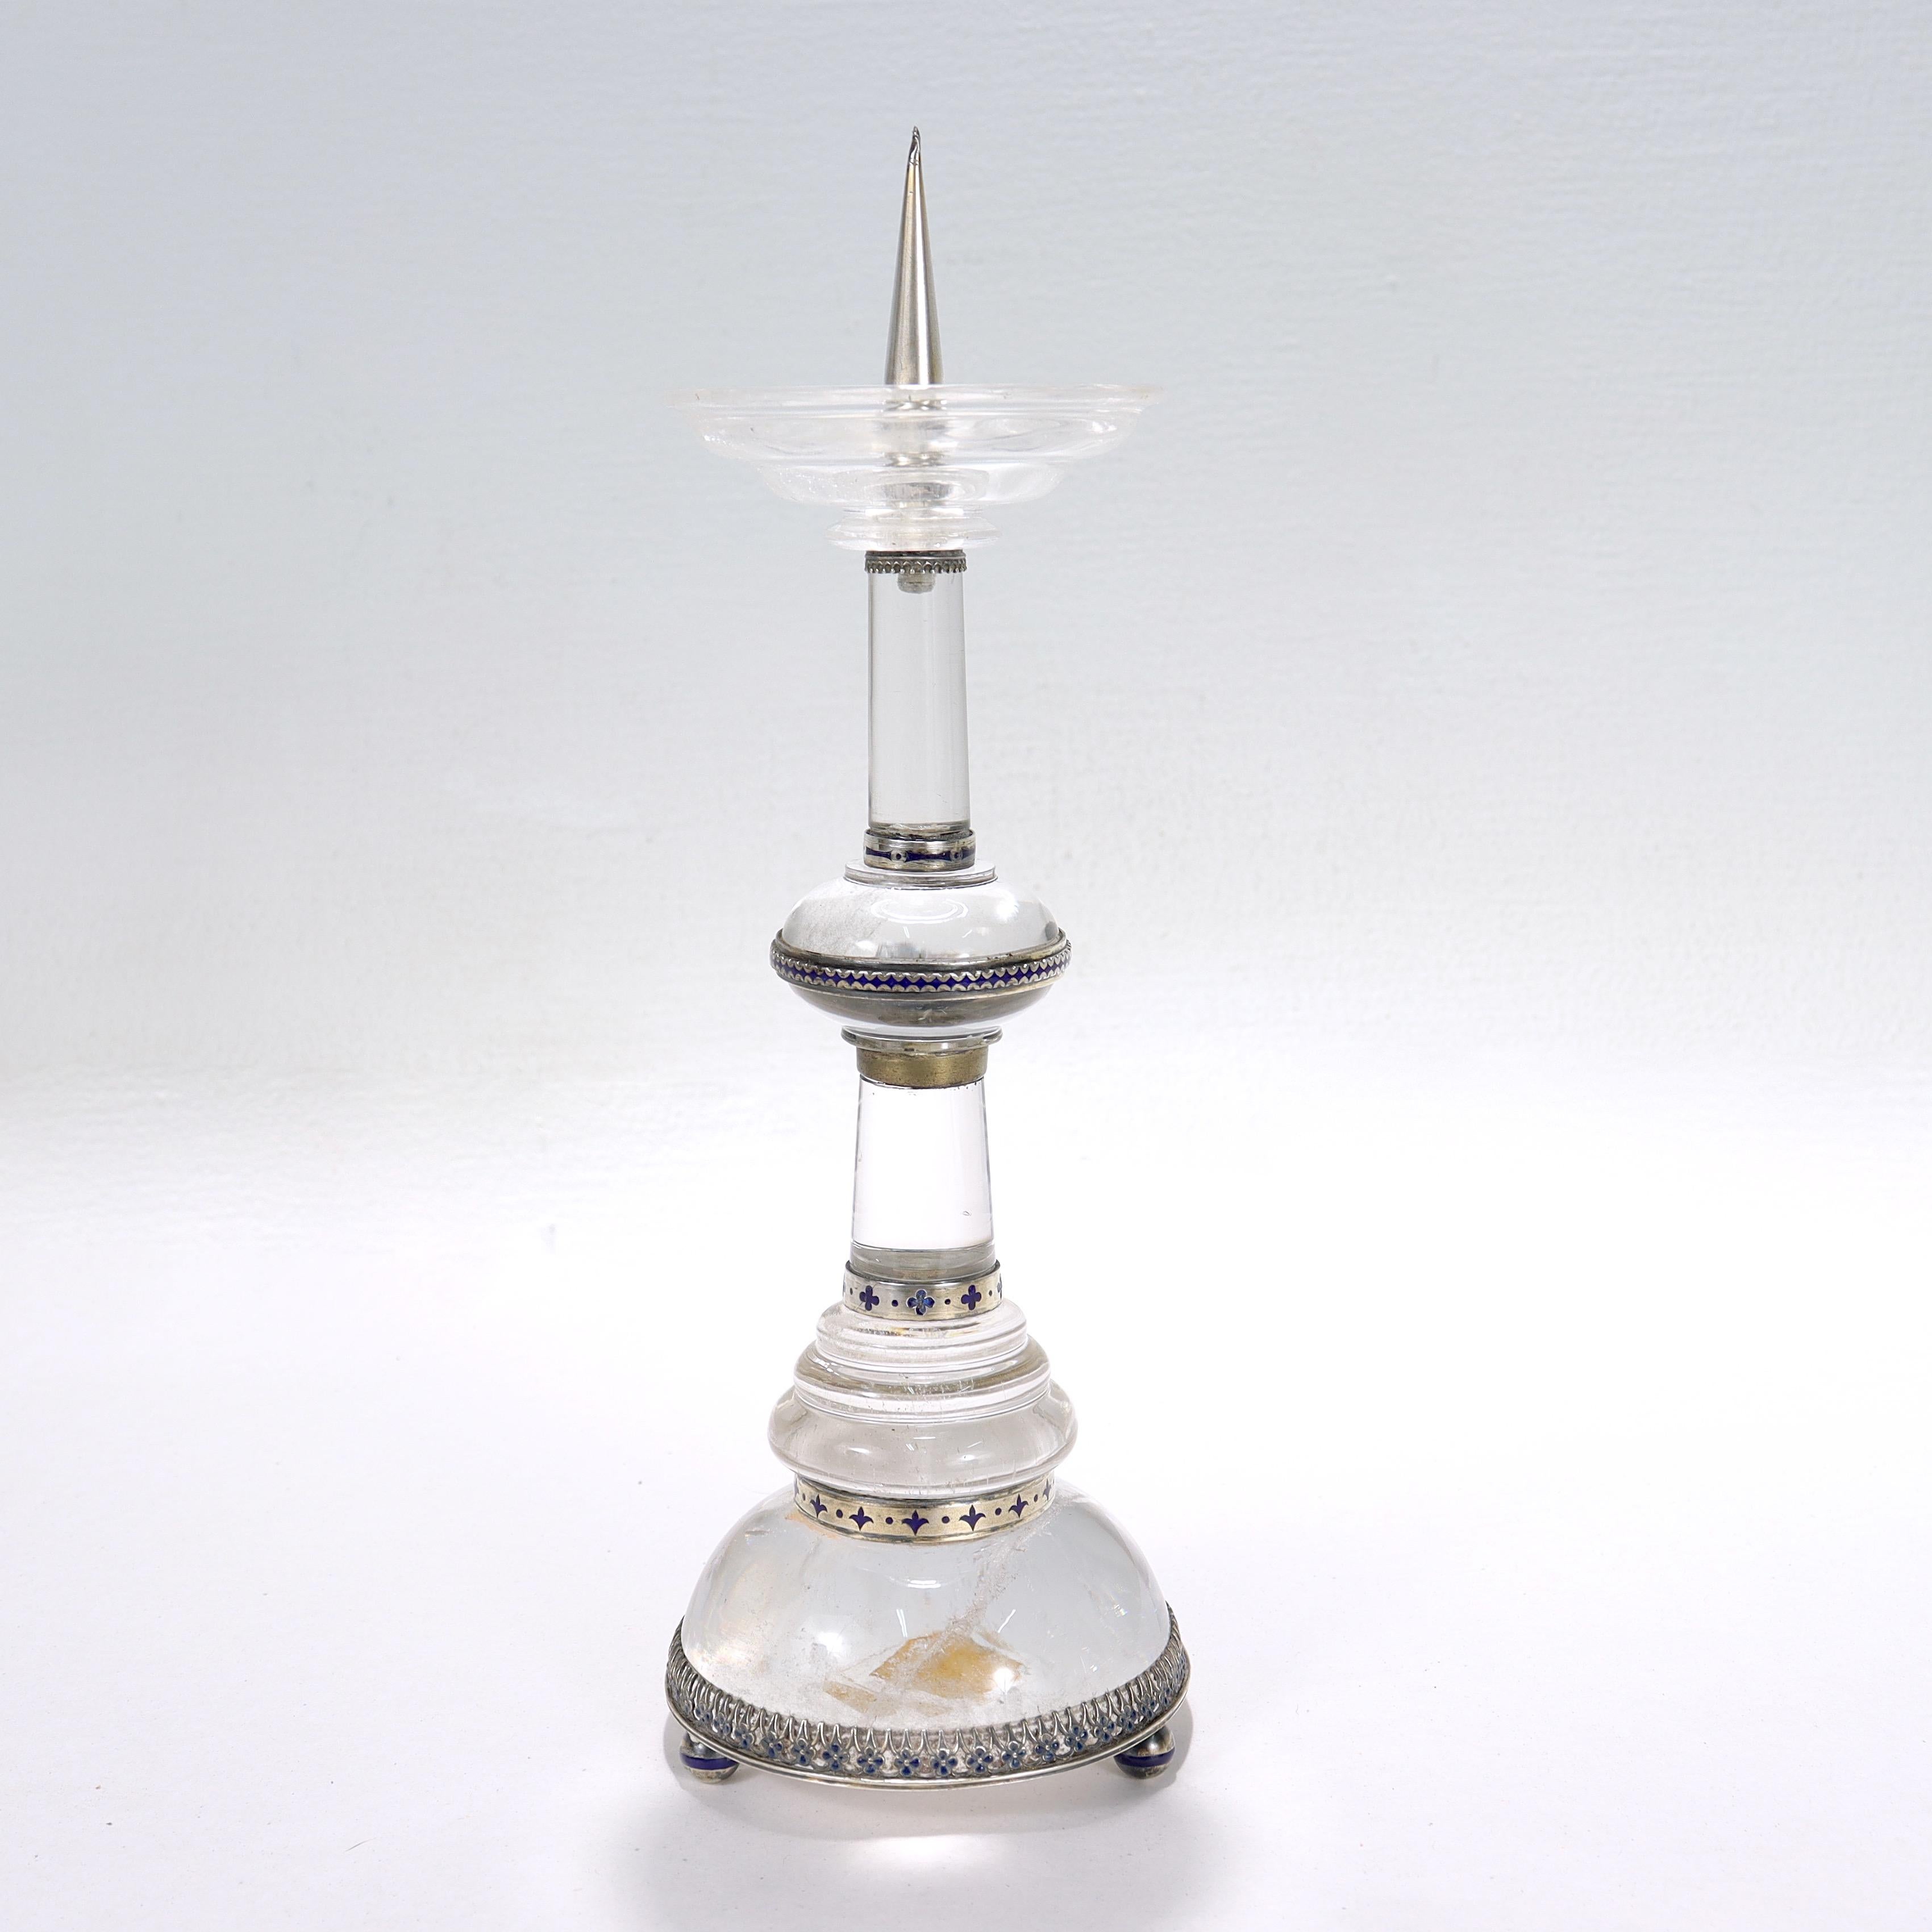 Baroque Revival Antique Austrian Rock Crystal, Silver, and Blue Enamel Pricket Candlestick For Sale